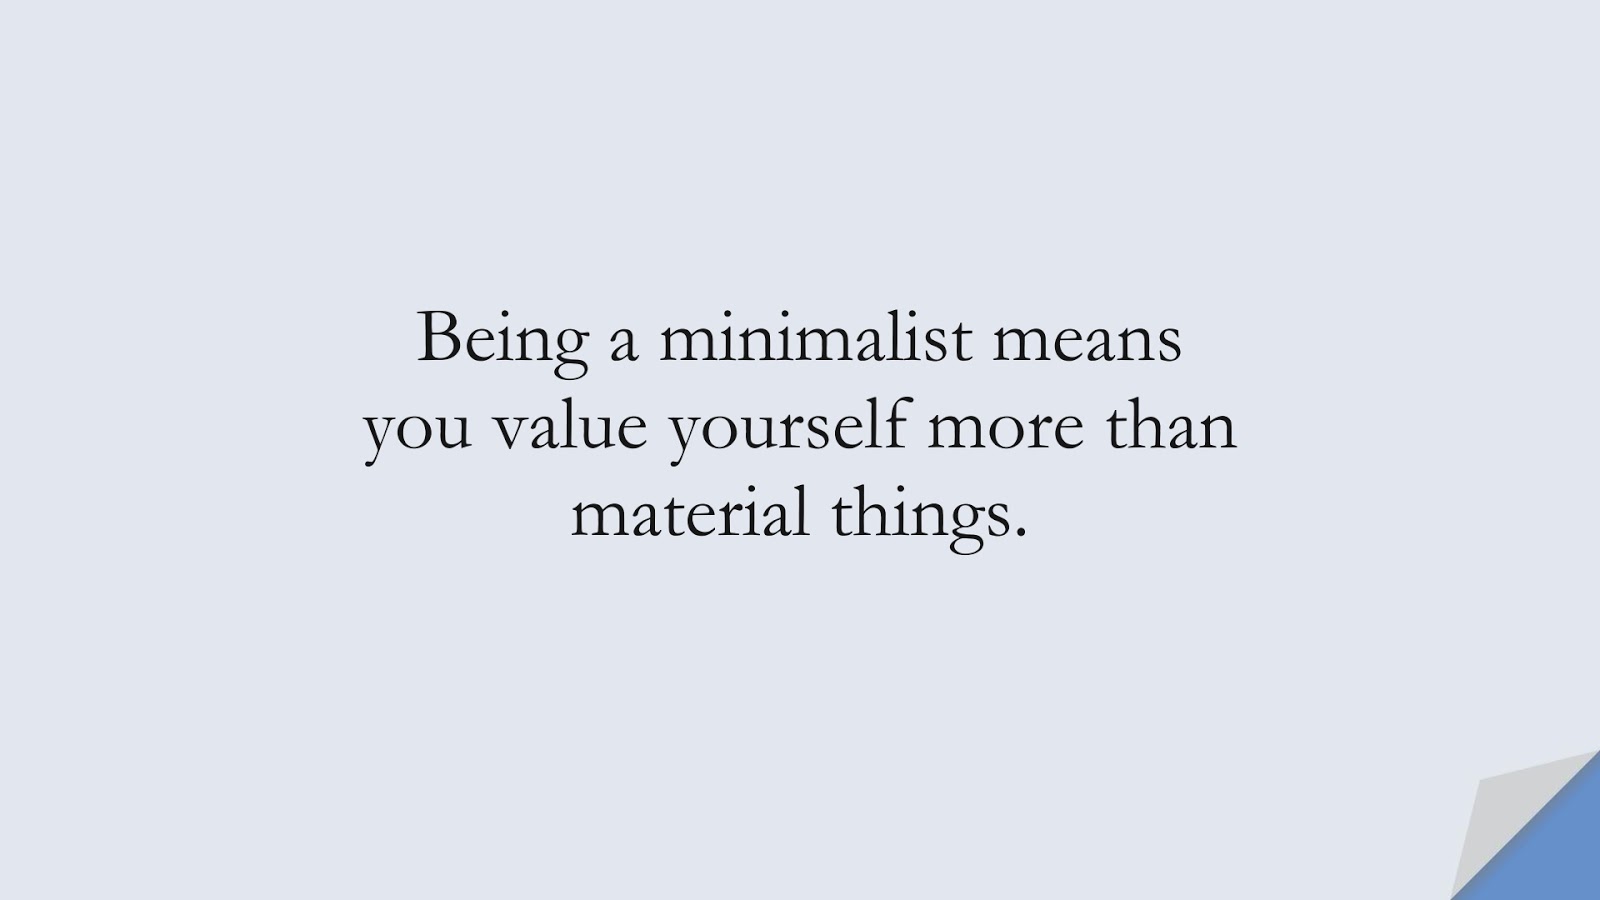 Being a minimalist means you value yourself more than material things.FALSE